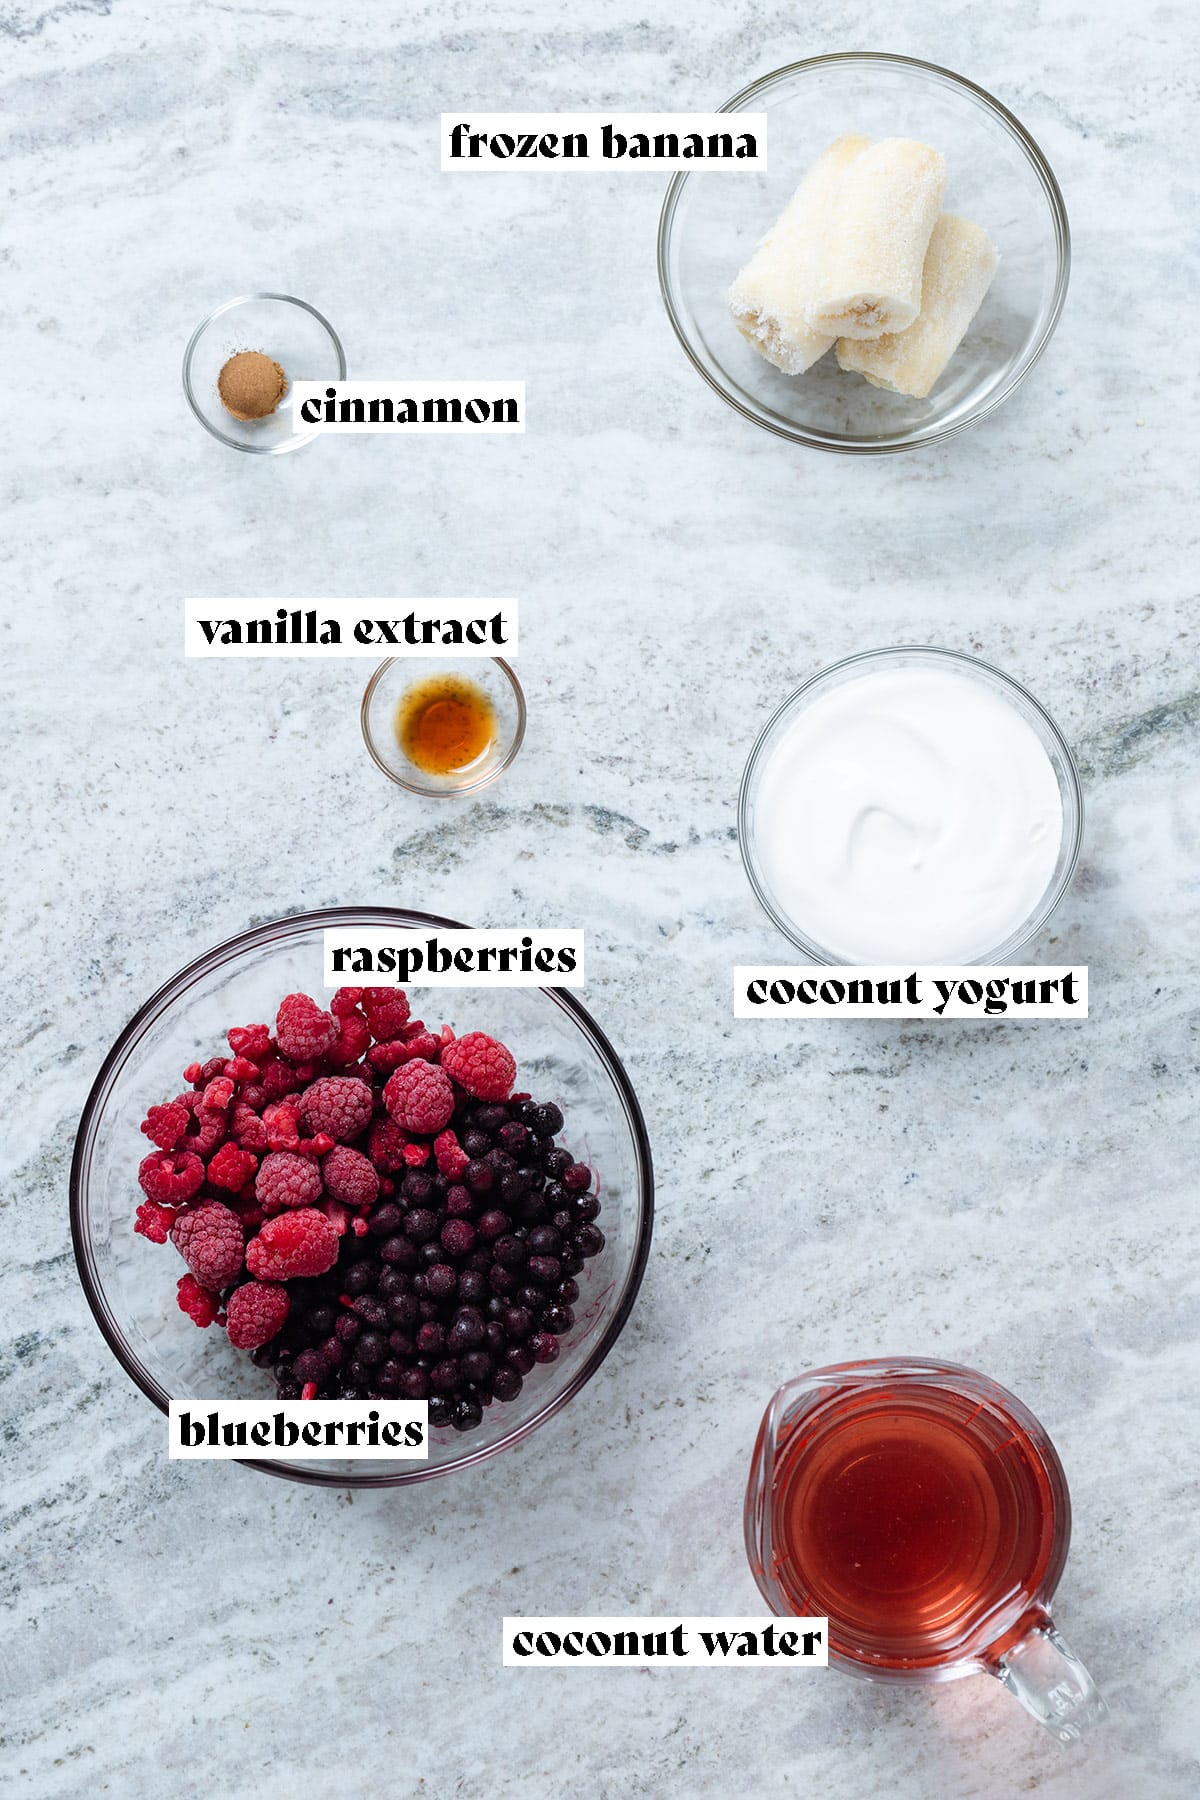 Ingredients like raspberries, blueberries, yogurt, and banana laid out on a grey stone background with text overlay.